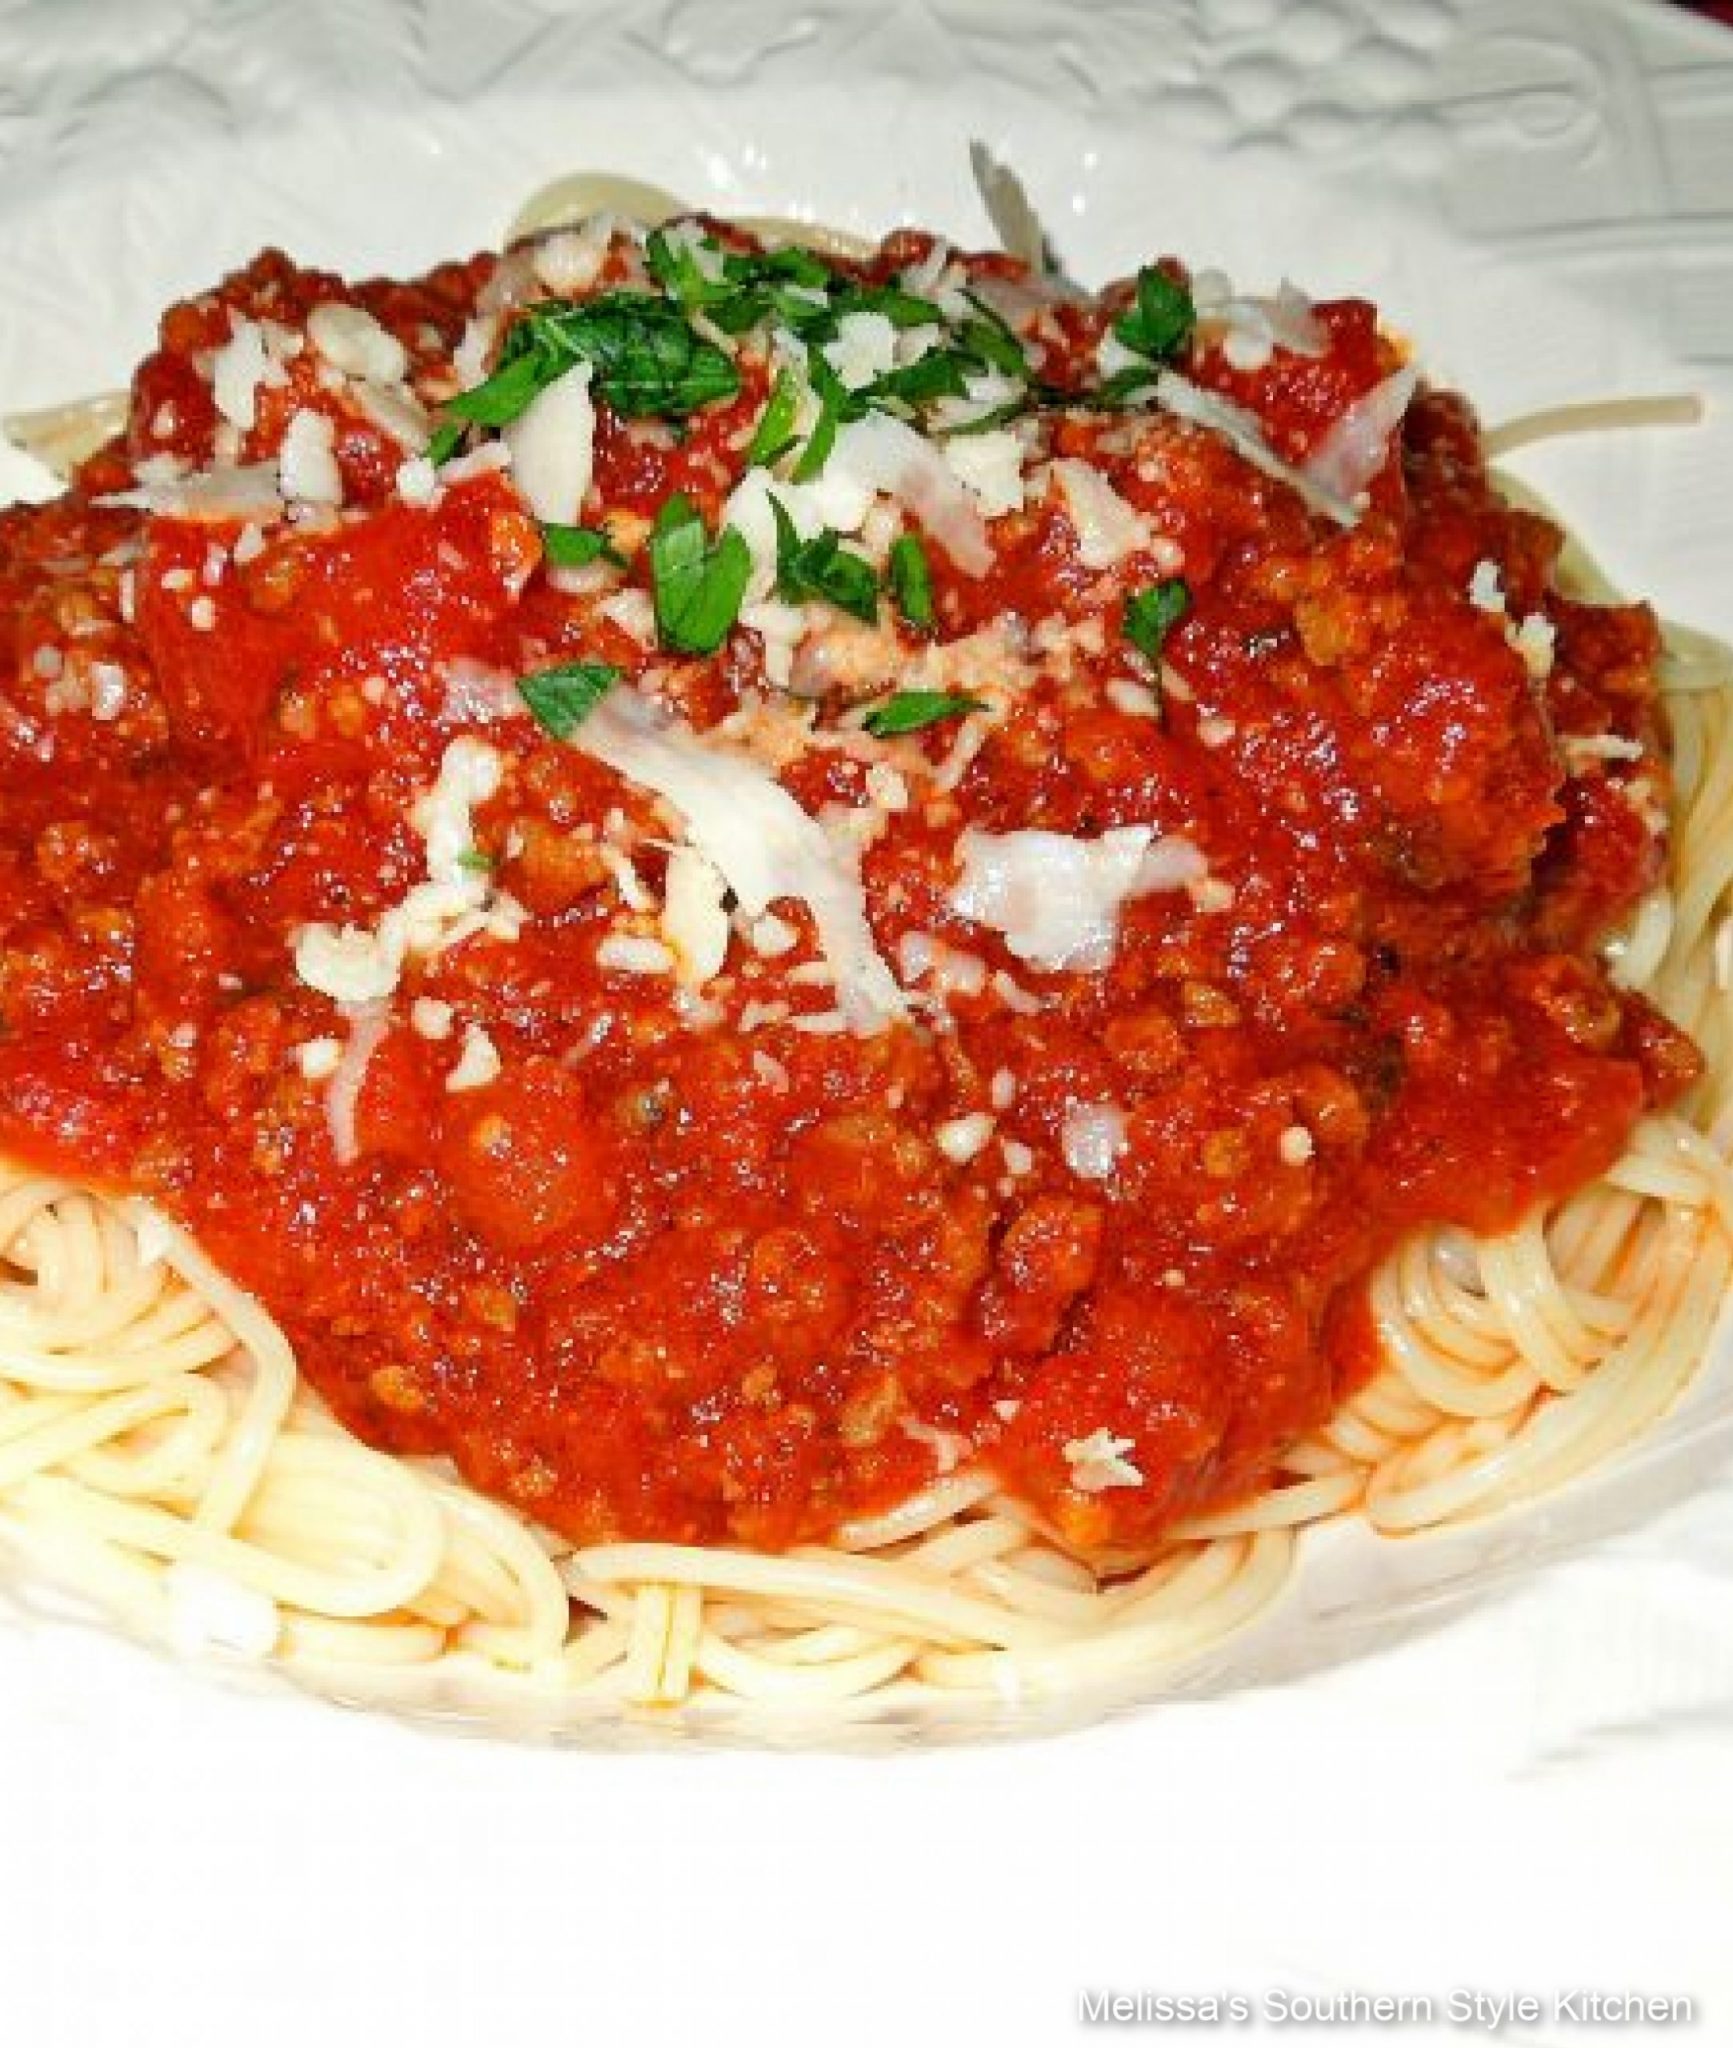 https://www.melissassouthernstylekitchen.com/wp-content/uploads/2011/09/plated-Slow-Cooker-Spaghetti-Sauce-scaled.jpg